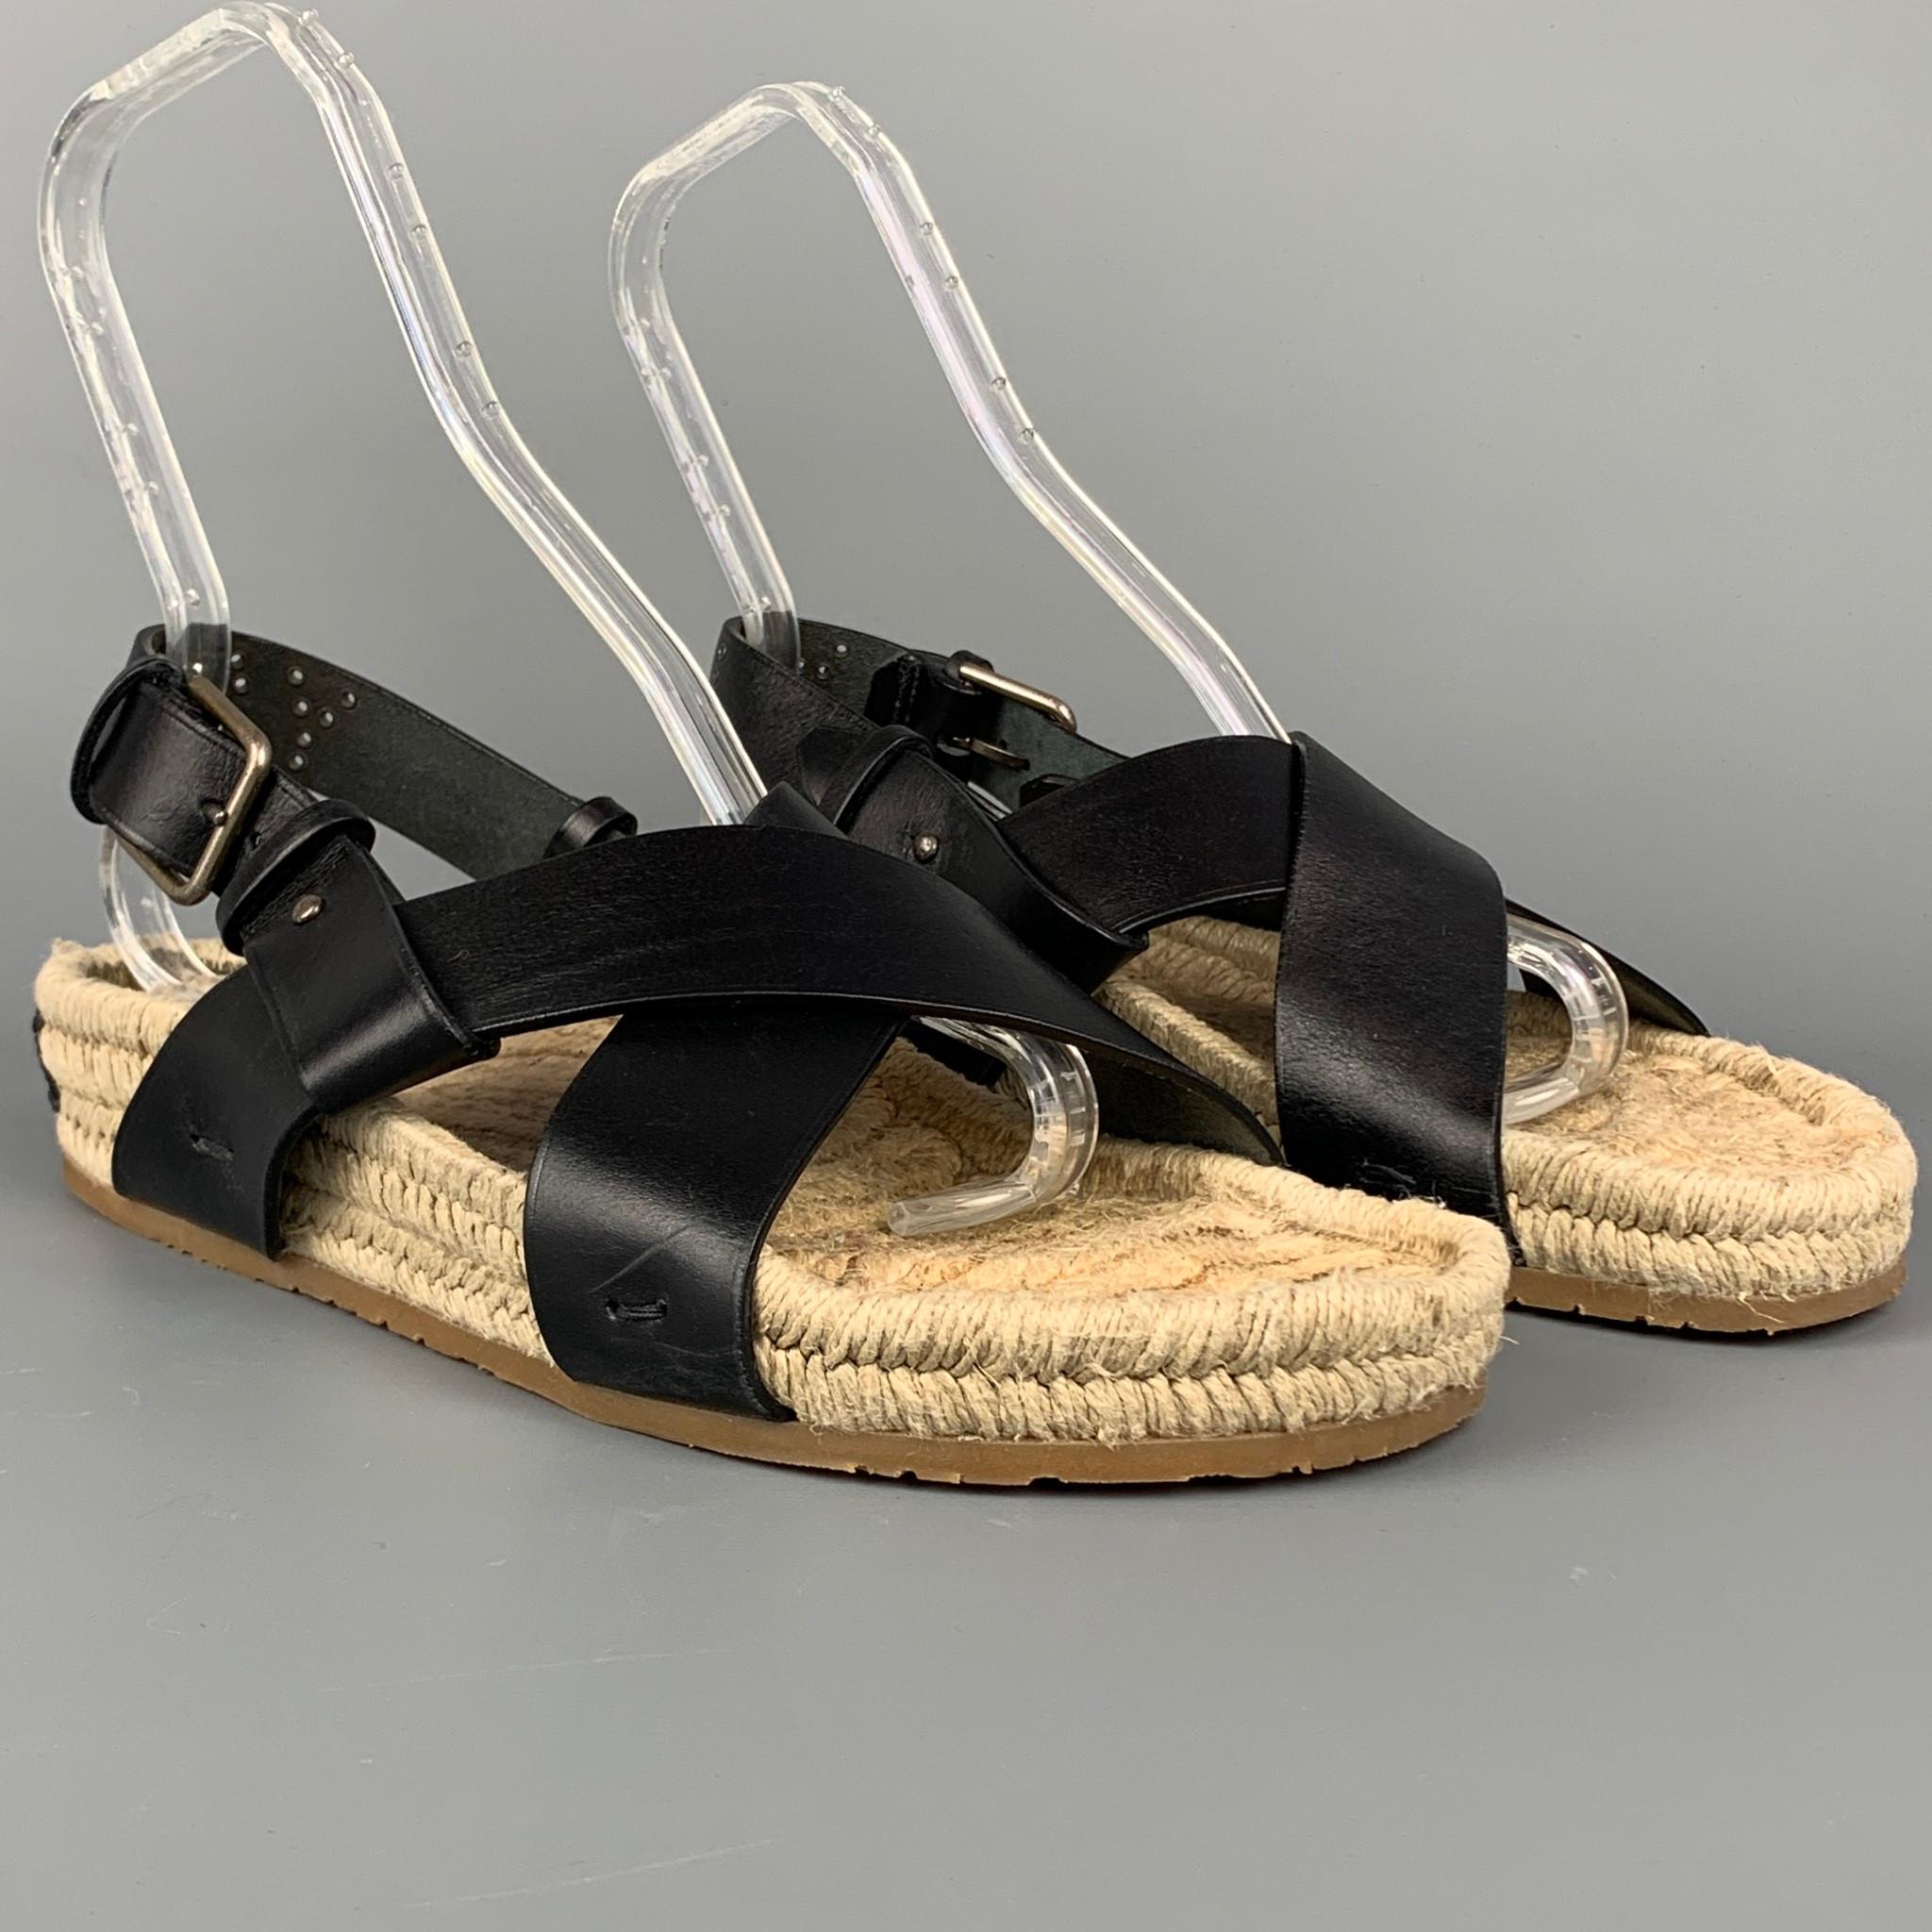 Yves Saint Laurent Rive Gauche by Tom Ford sandals comes in a black & natural leather featuring a back studded YSL rivetted design, jute sole, and a buckle strap closure. Logo on heel. Made in Italy. 

Very Good Pre-Owned Condition.
Marked: